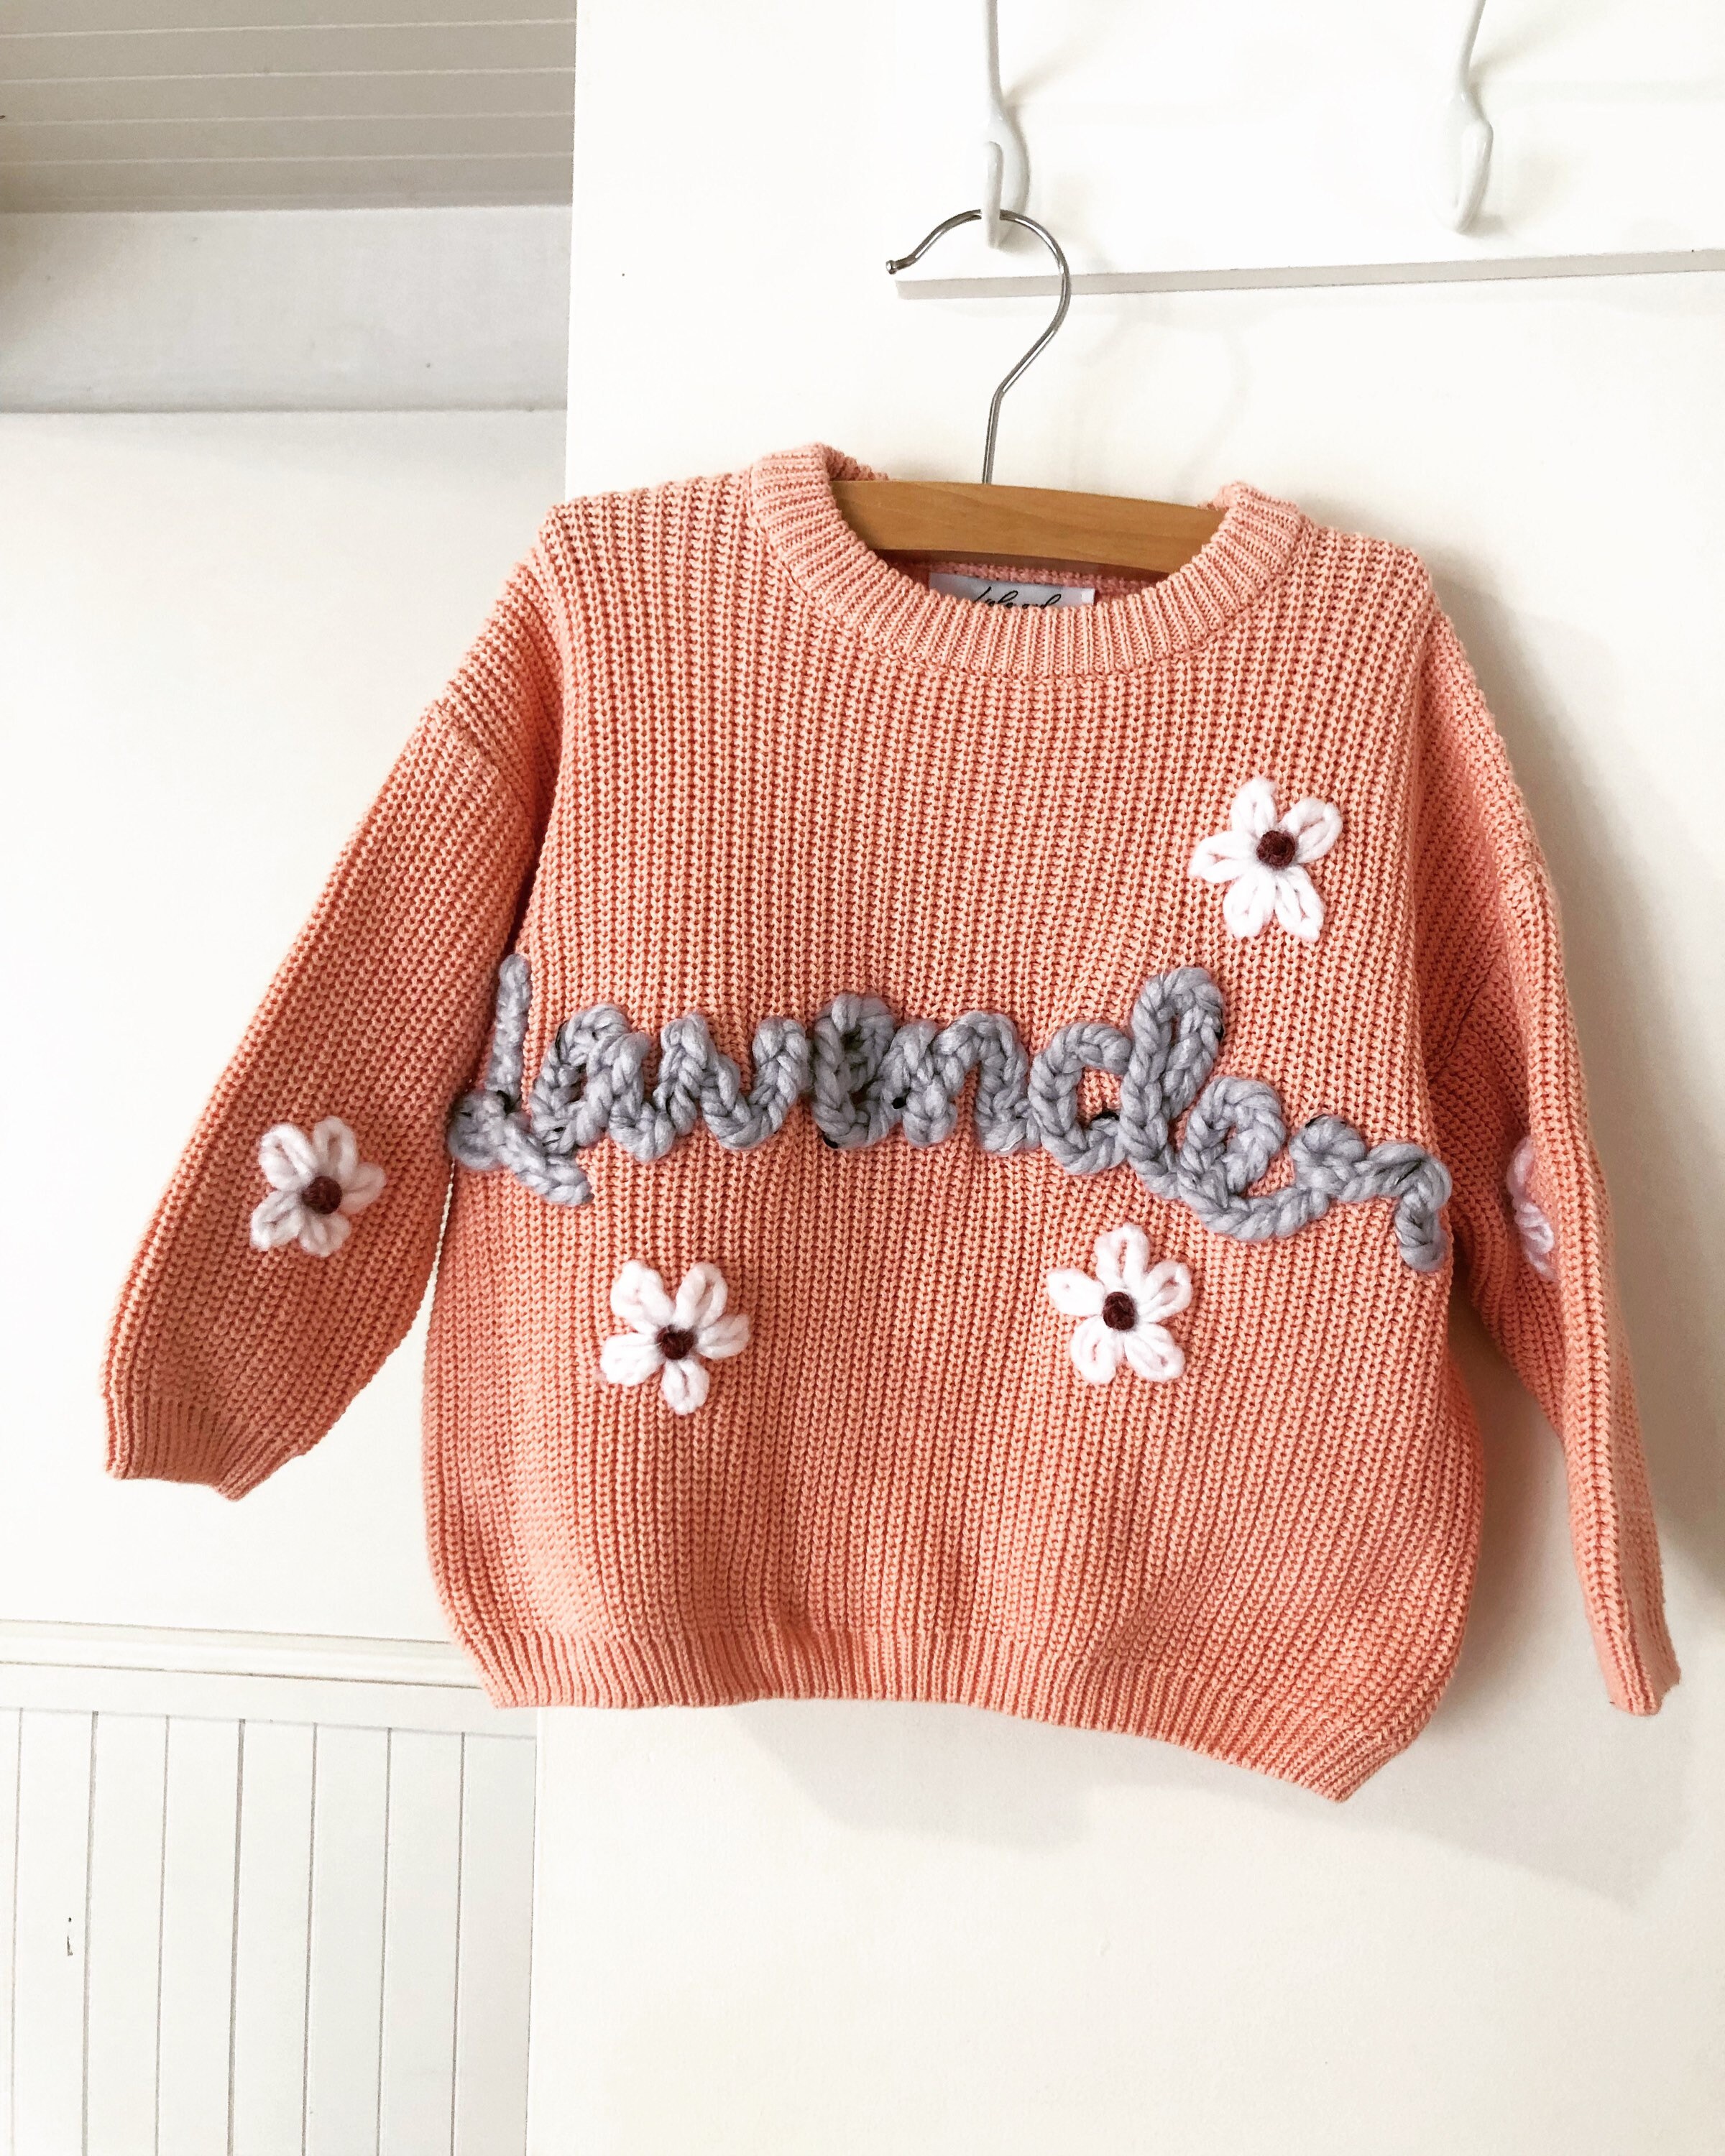 Cable Knit with Buttons on Front Some Pilling Throughout Kleding Unisex kinderkleding Unisex babykleding Sweaters Vintage Hand Knit Orange Halloween Sweater Jumper for Baby 